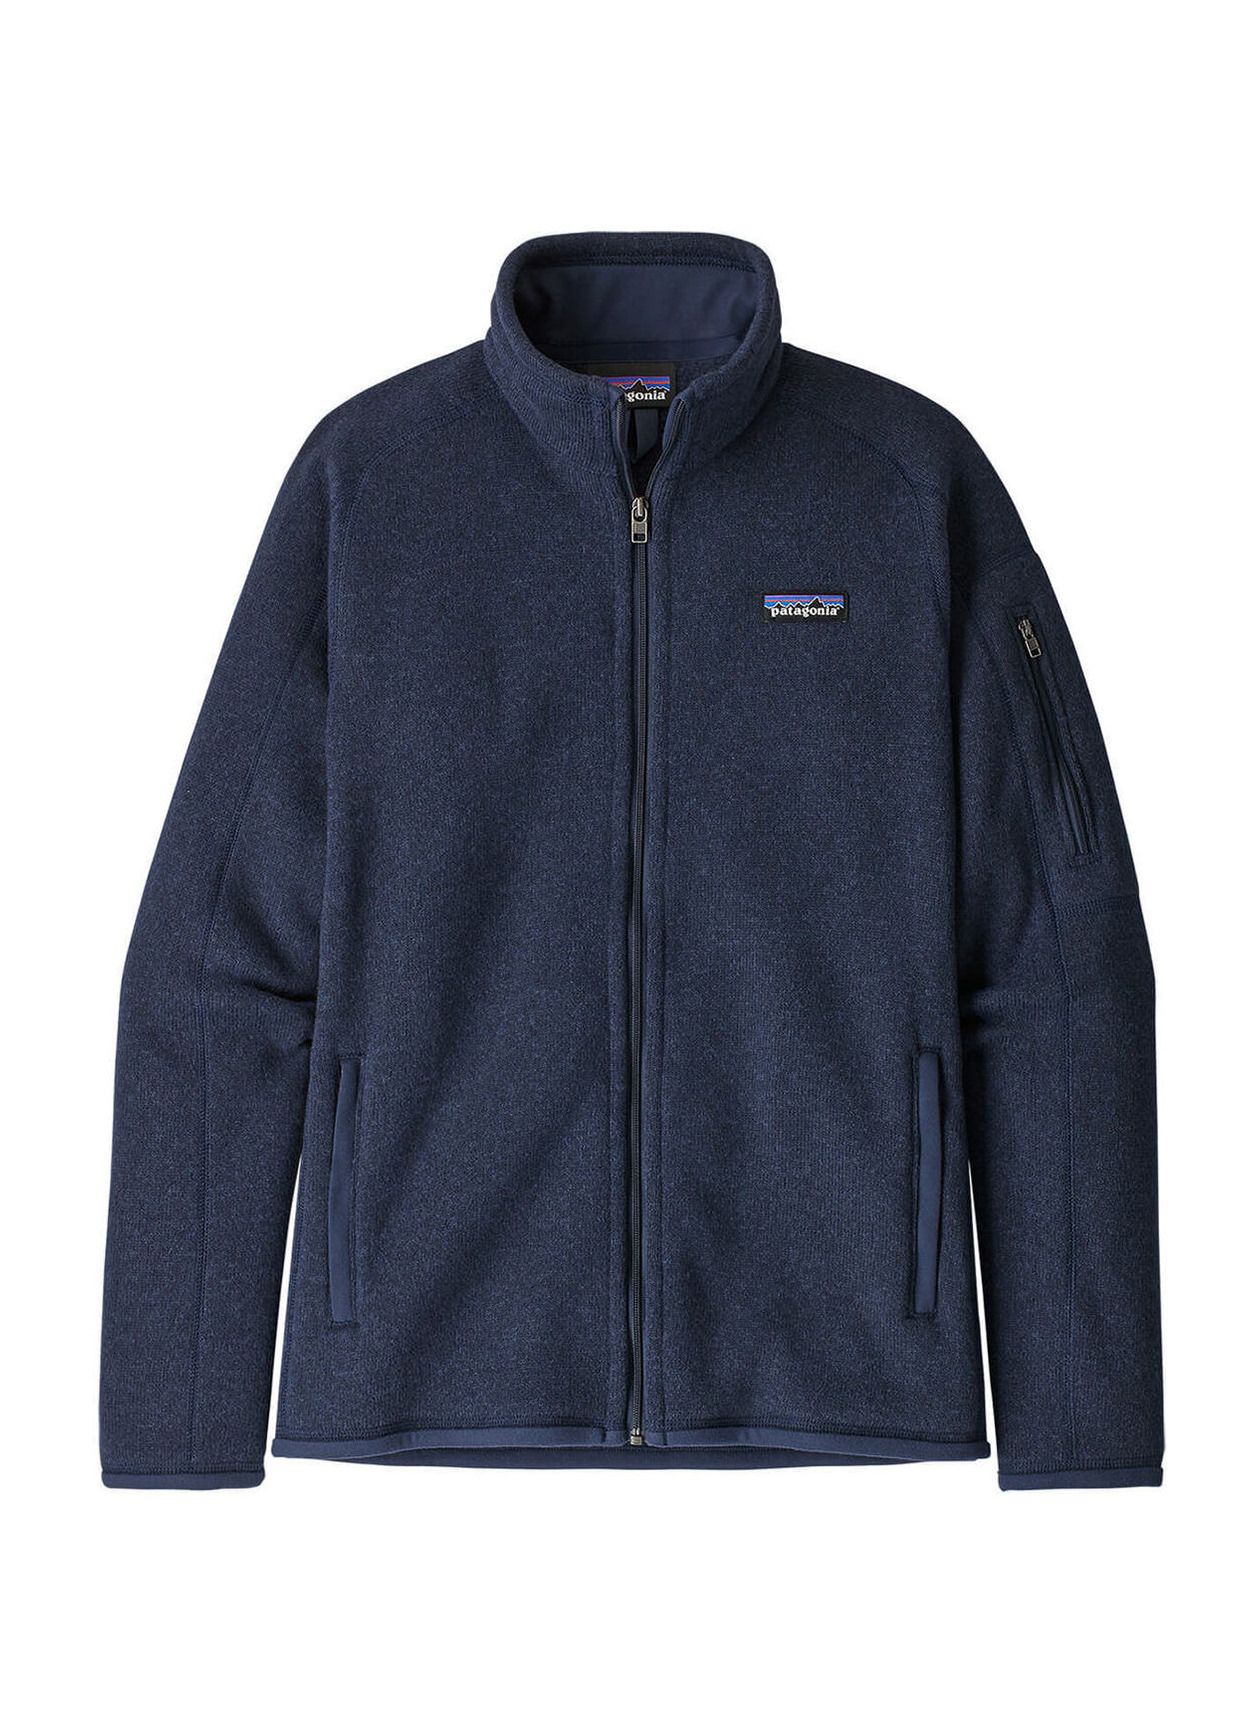 Patagonia Women's New Navy Better Sweater Jacket